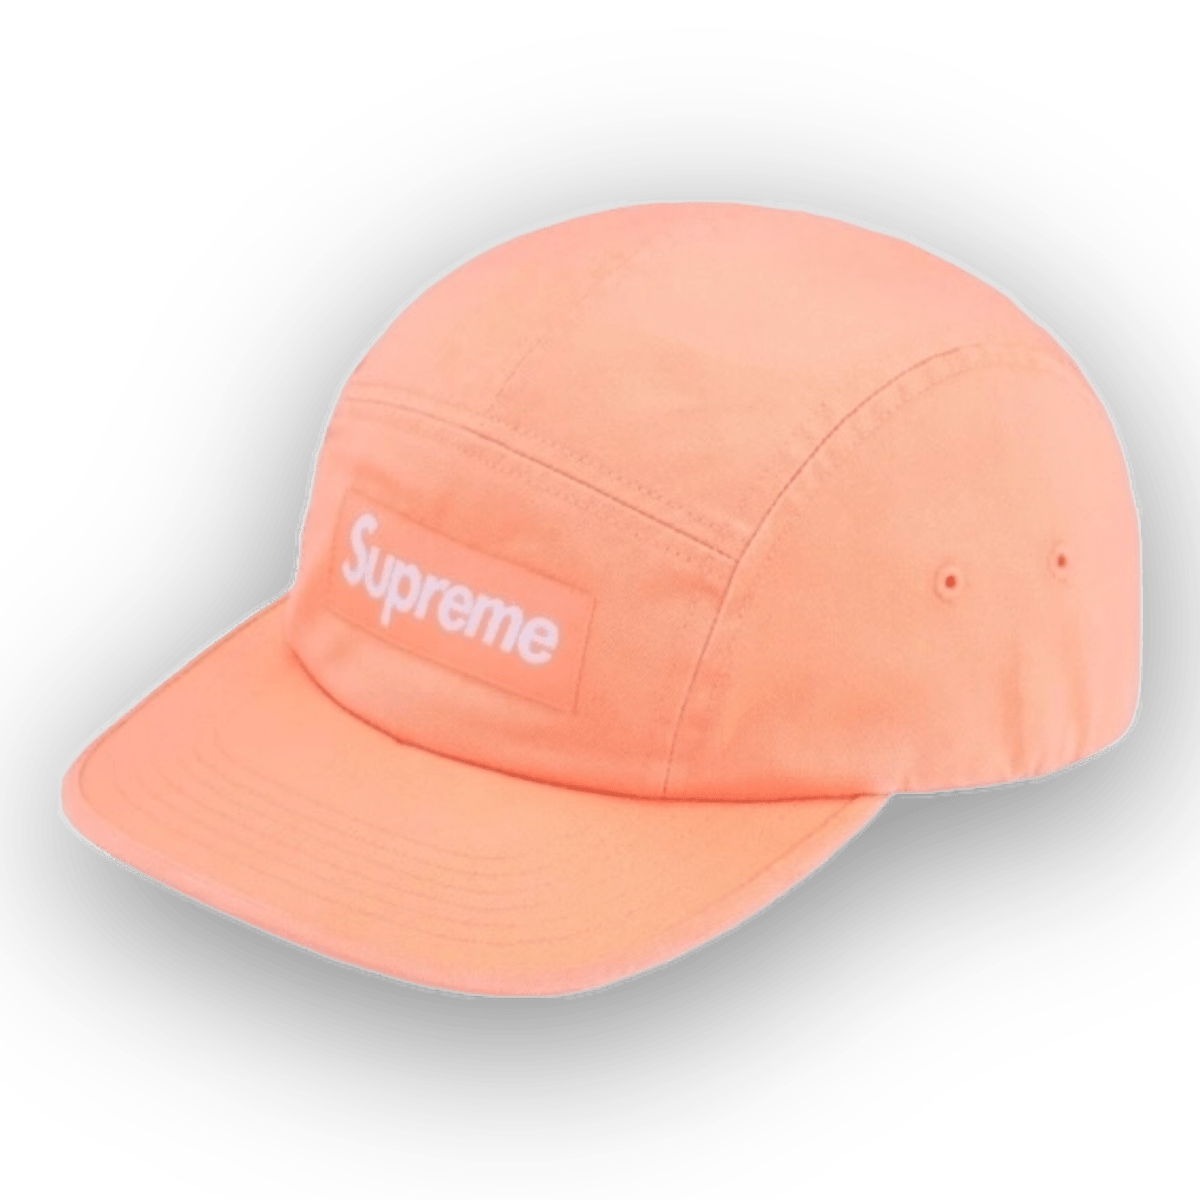 Jawns on Fire Supreme Headwear Supreme Washed Chino Twill Camp Cap Hat